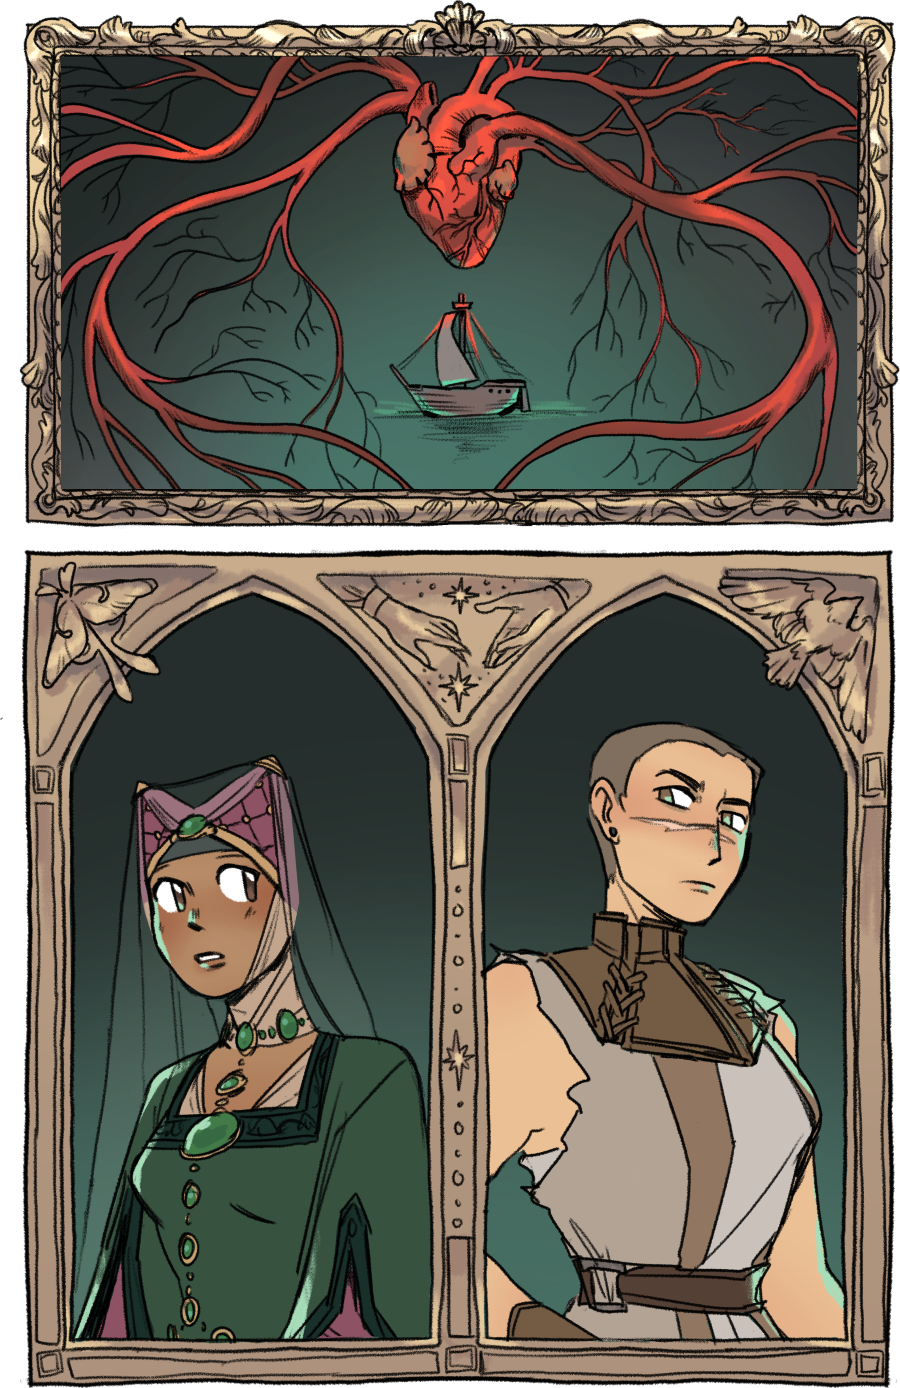 Two images in picture frames. The top has an anatomical heart with veins surrounding a ship. The bottom has two characters in separate arched frames. The left is a woman in a medieval dress and escoffion. The right has an androgynous person with a facial scar.